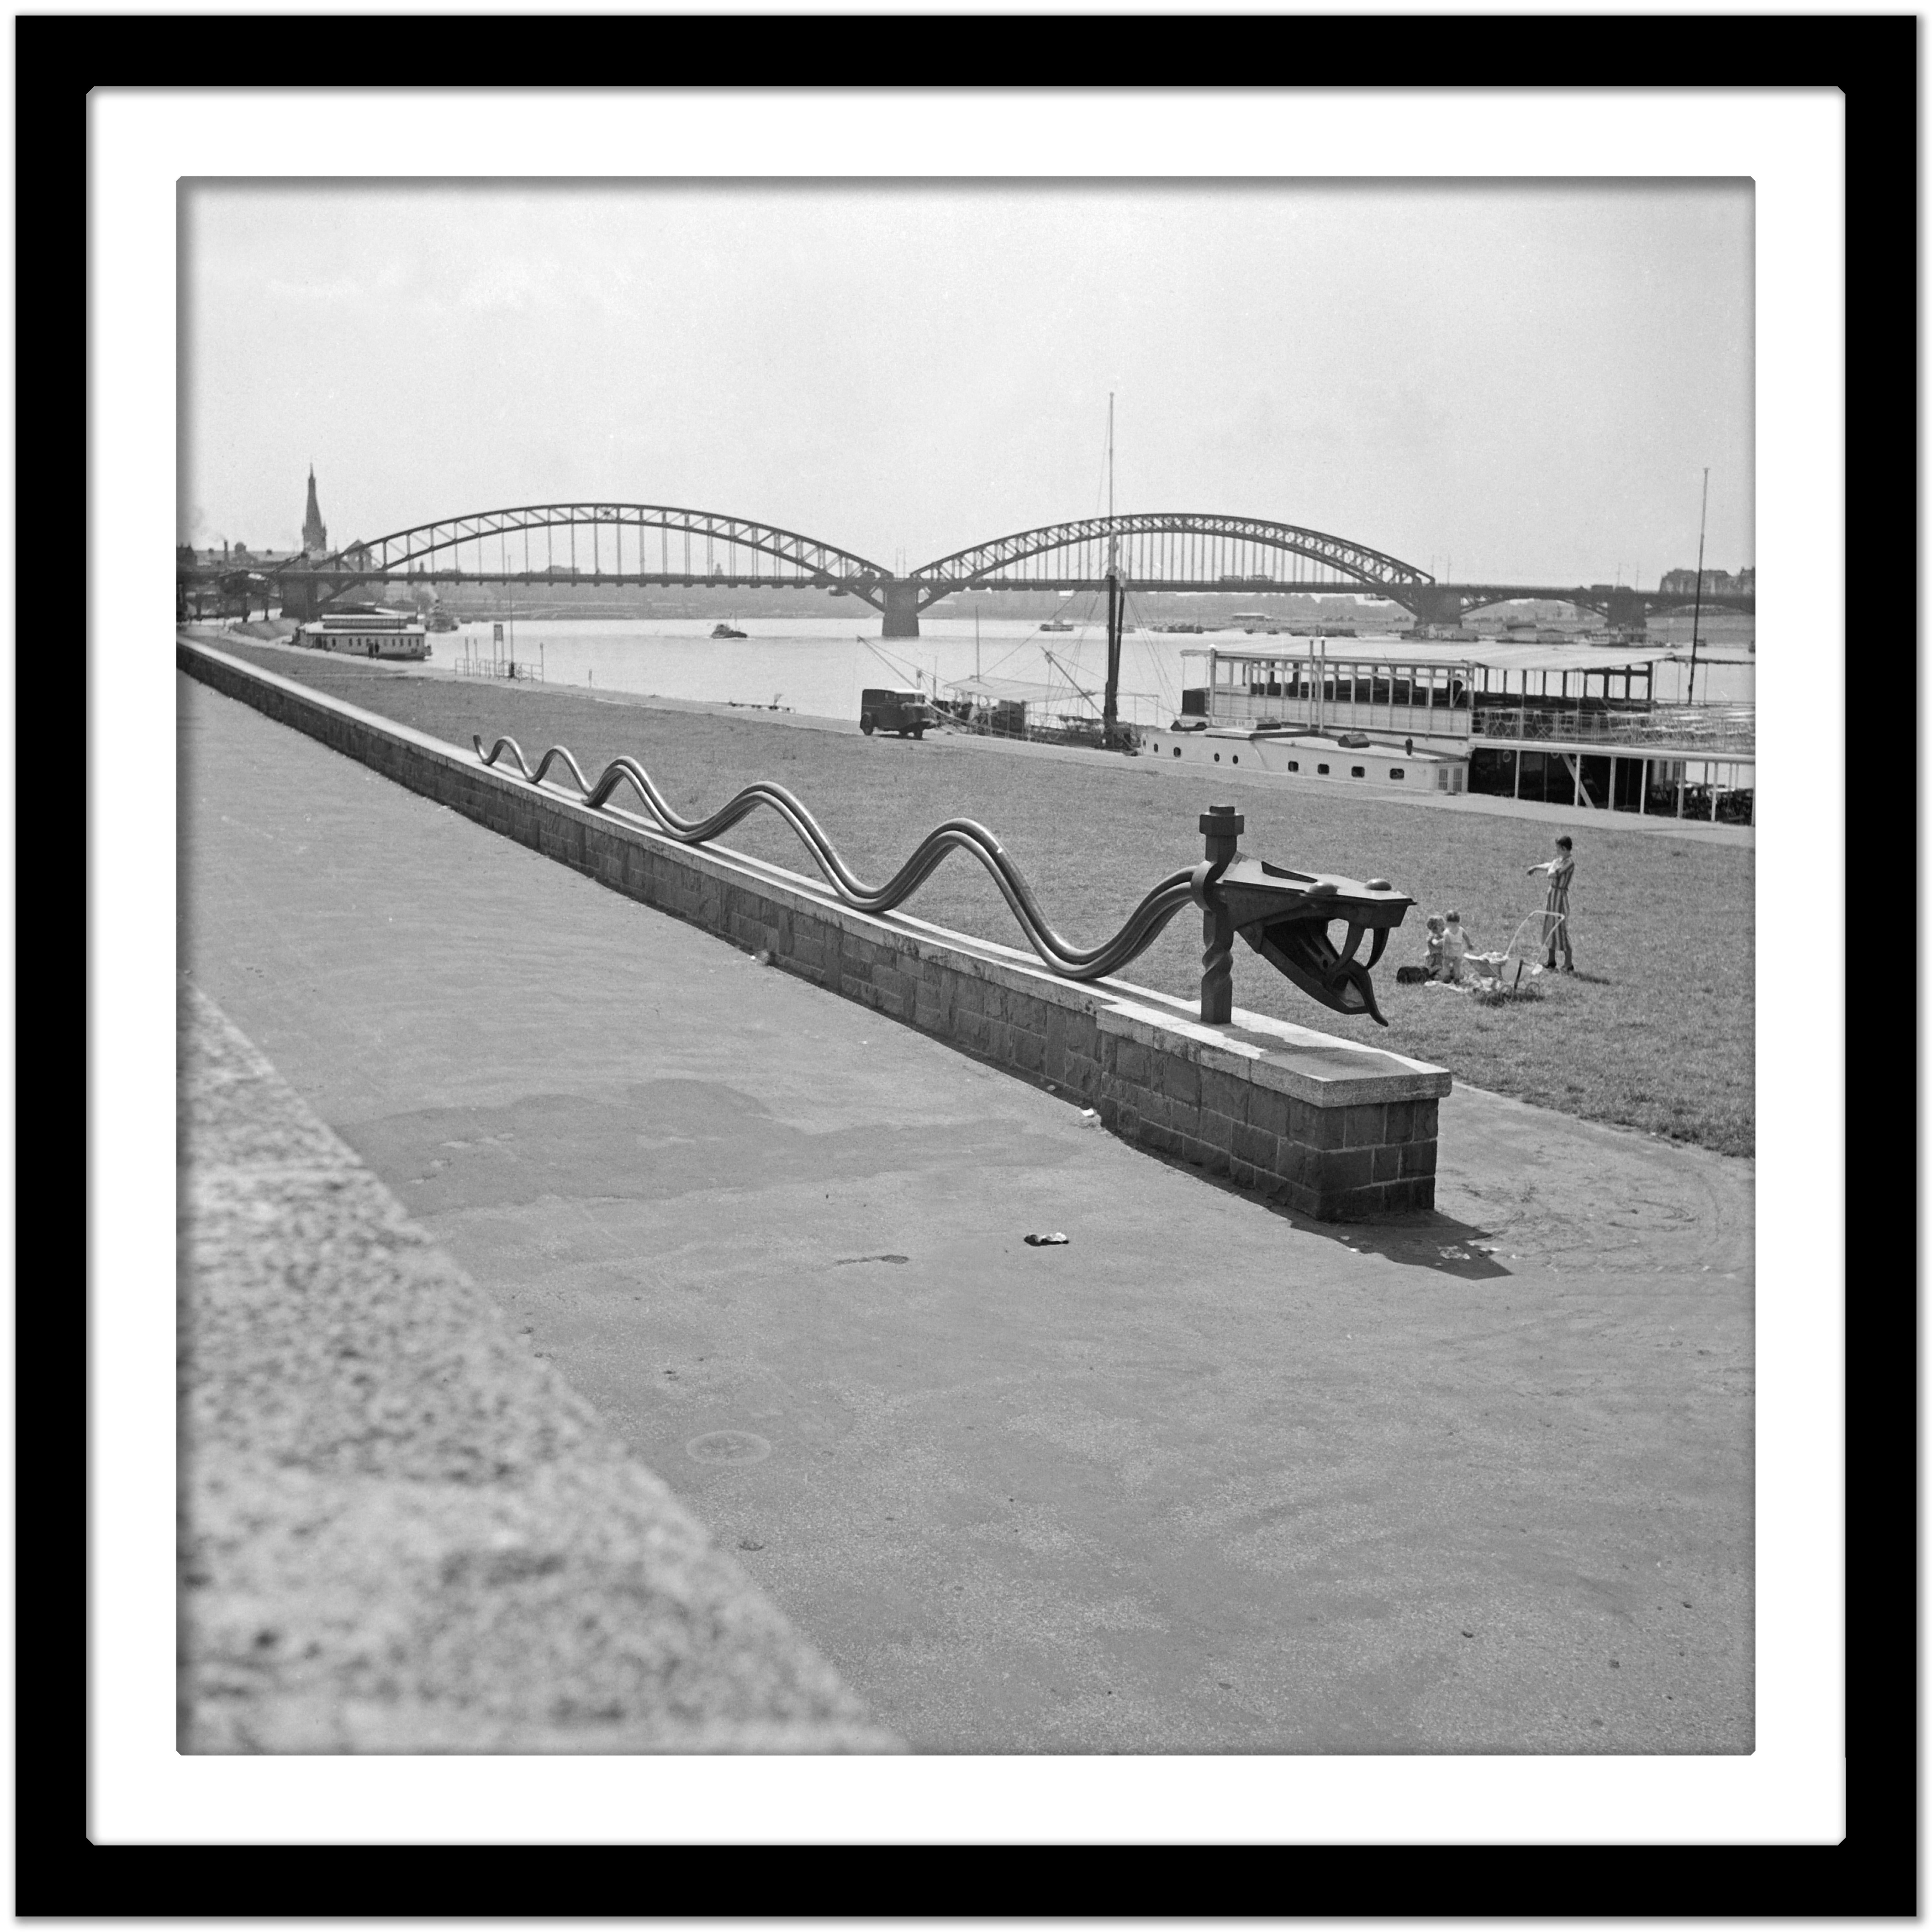 Rhine snake sculpture at shore of Rhine Duesseldorf, Germany 1937 Printed Later  - Gray Black and White Photograph by Karl Heinrich Lämmel